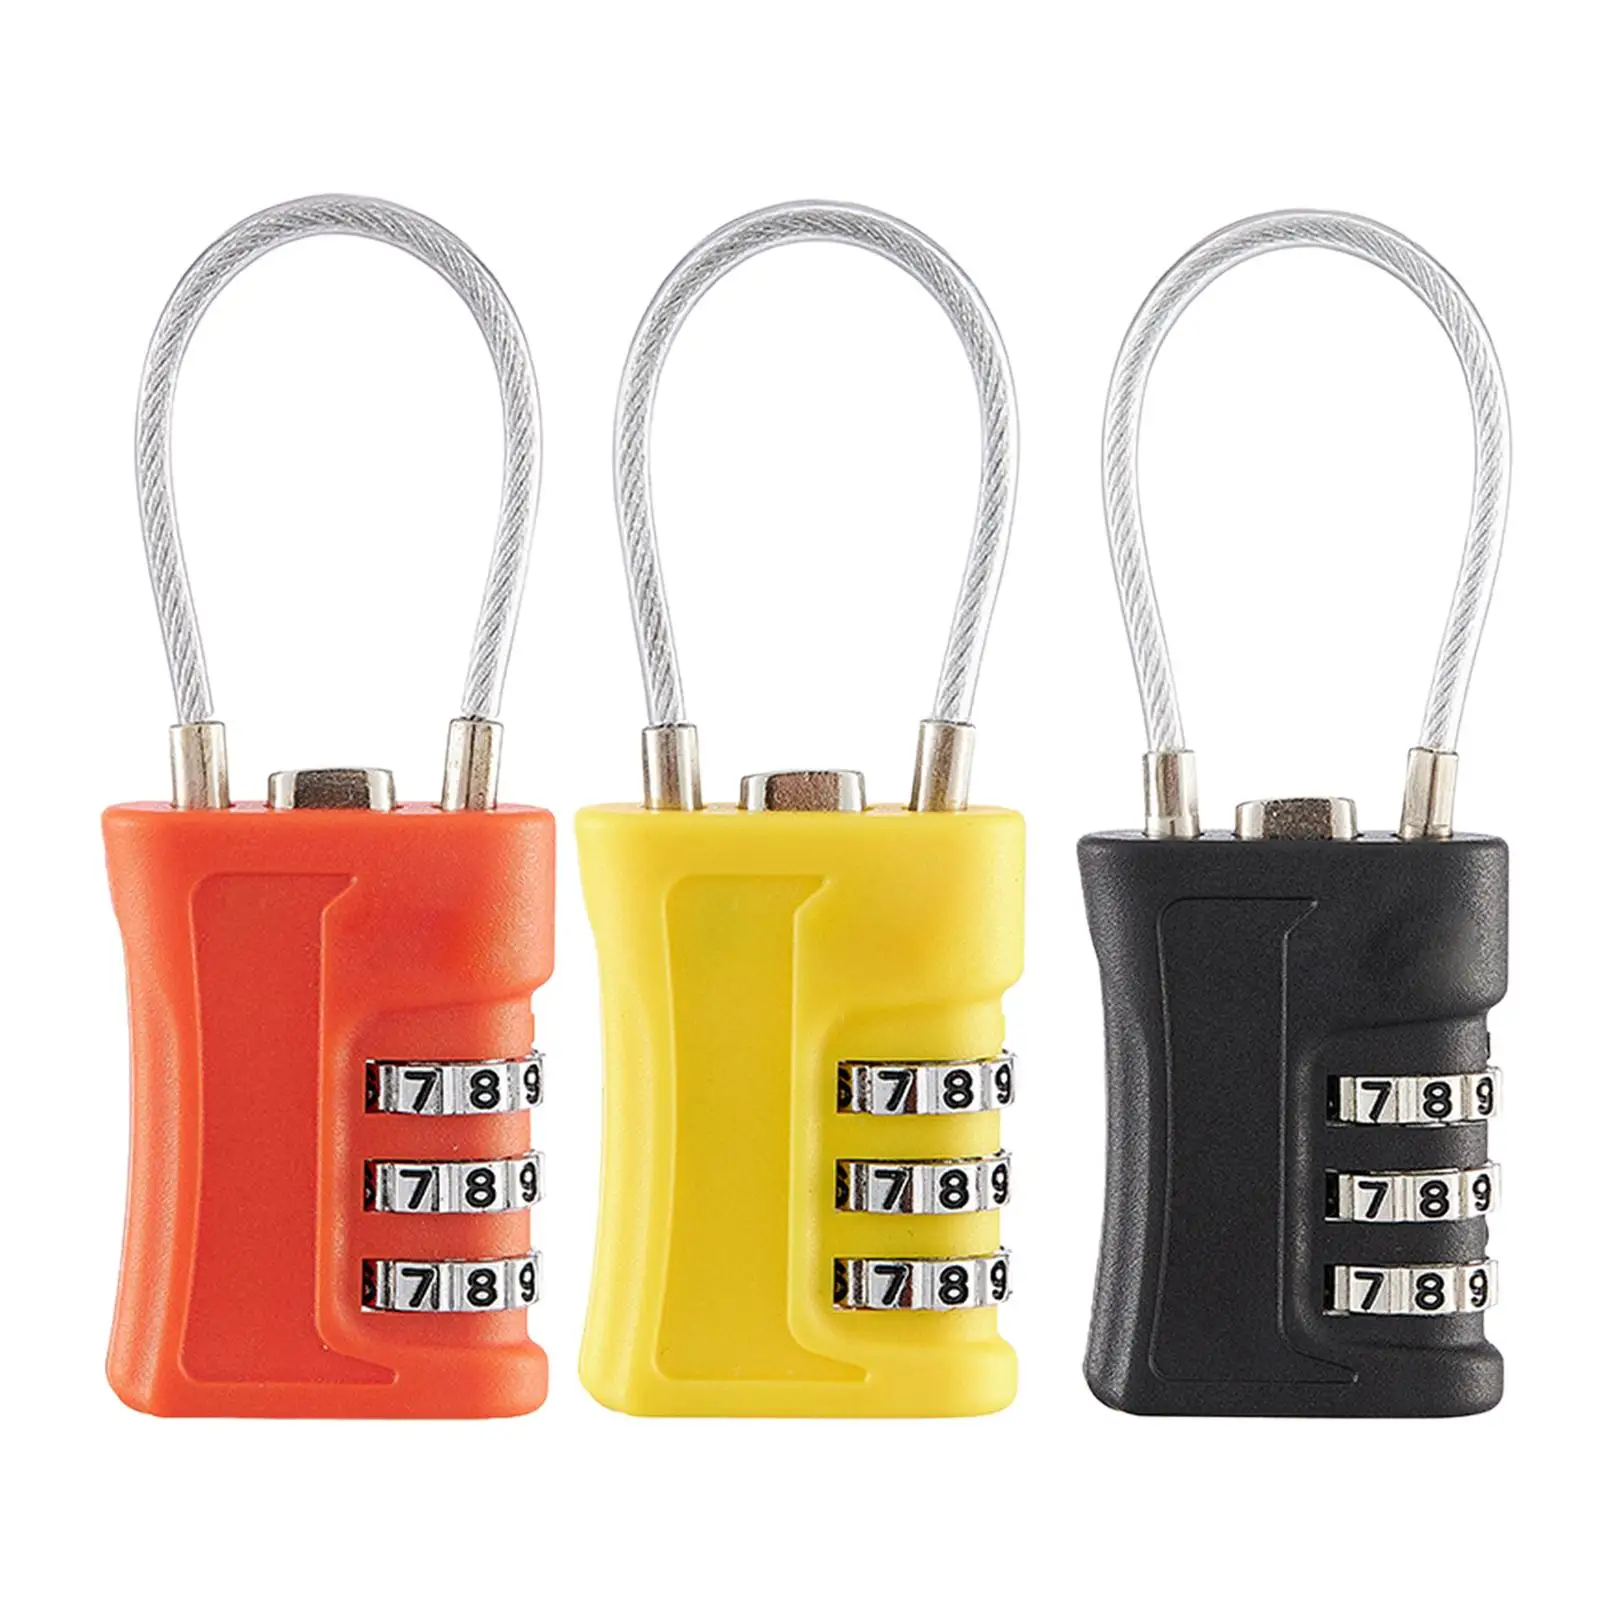 3 Digit Combination Lock Code Lock for Gym Bags Cabinet Storage Going Abroad